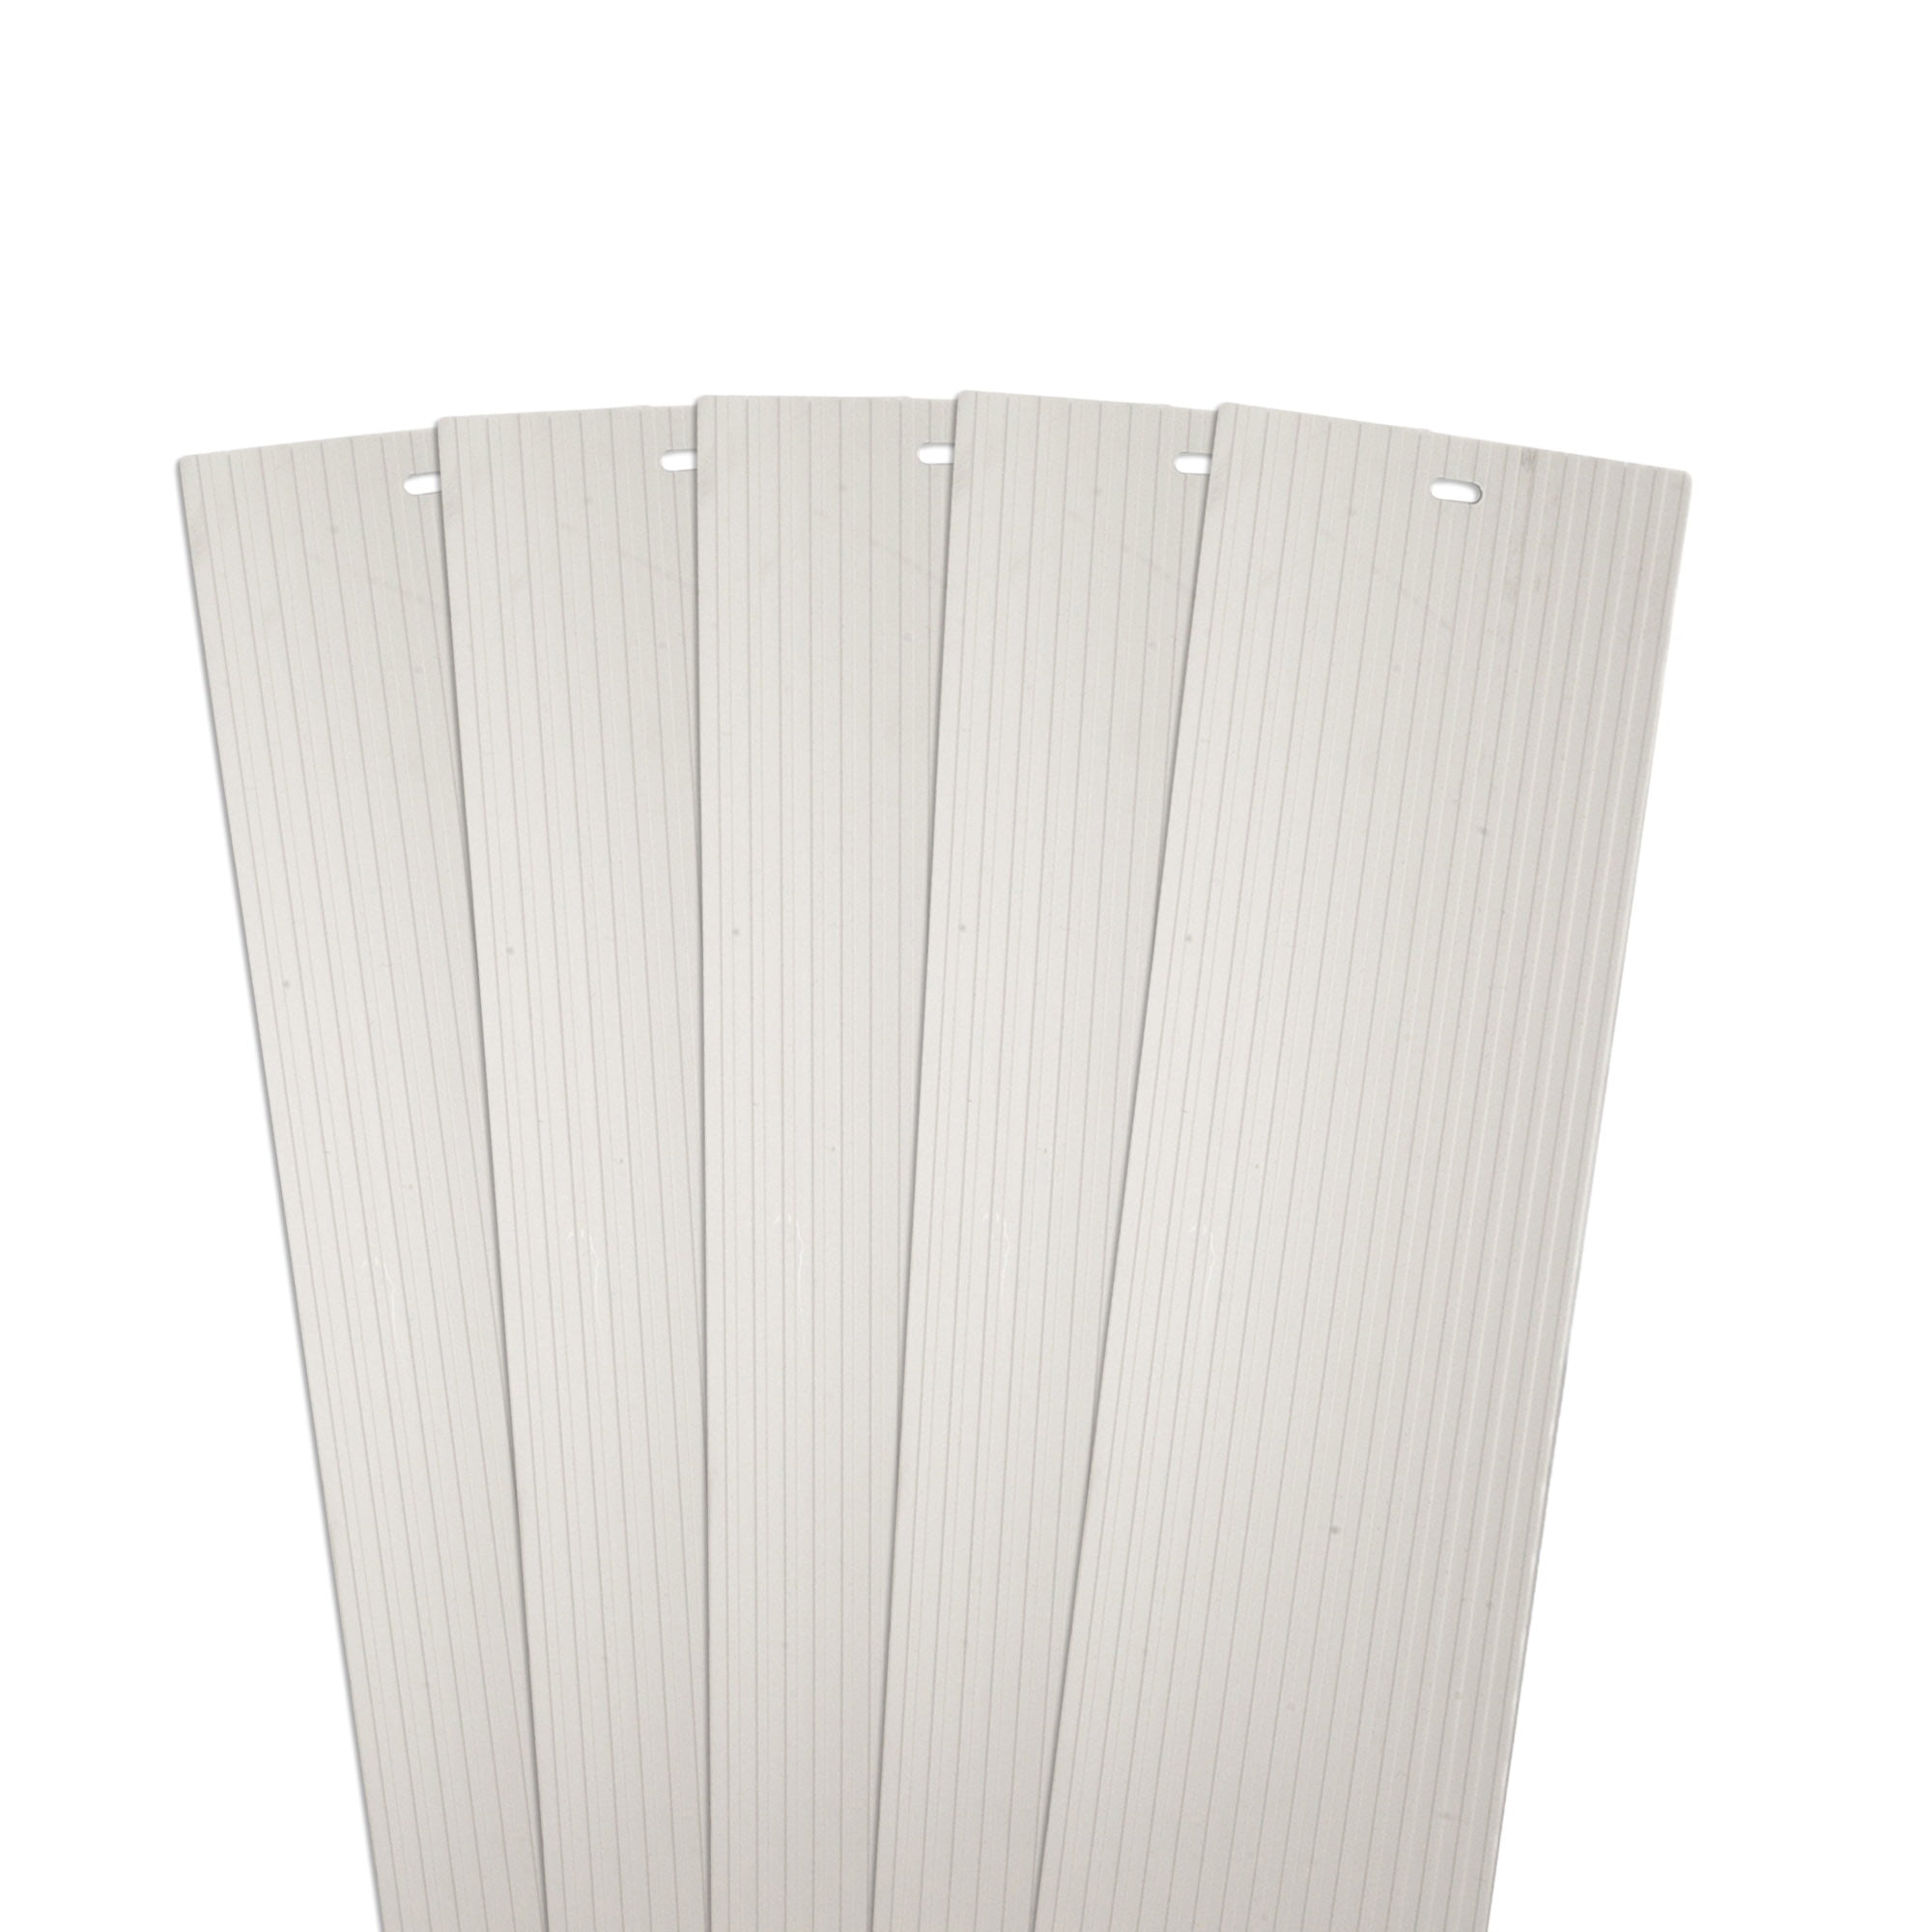 Vertical Blind Slats Vanes Replacement Blinds Ivory 42.5" x 3.5" FREE SHIPPING 